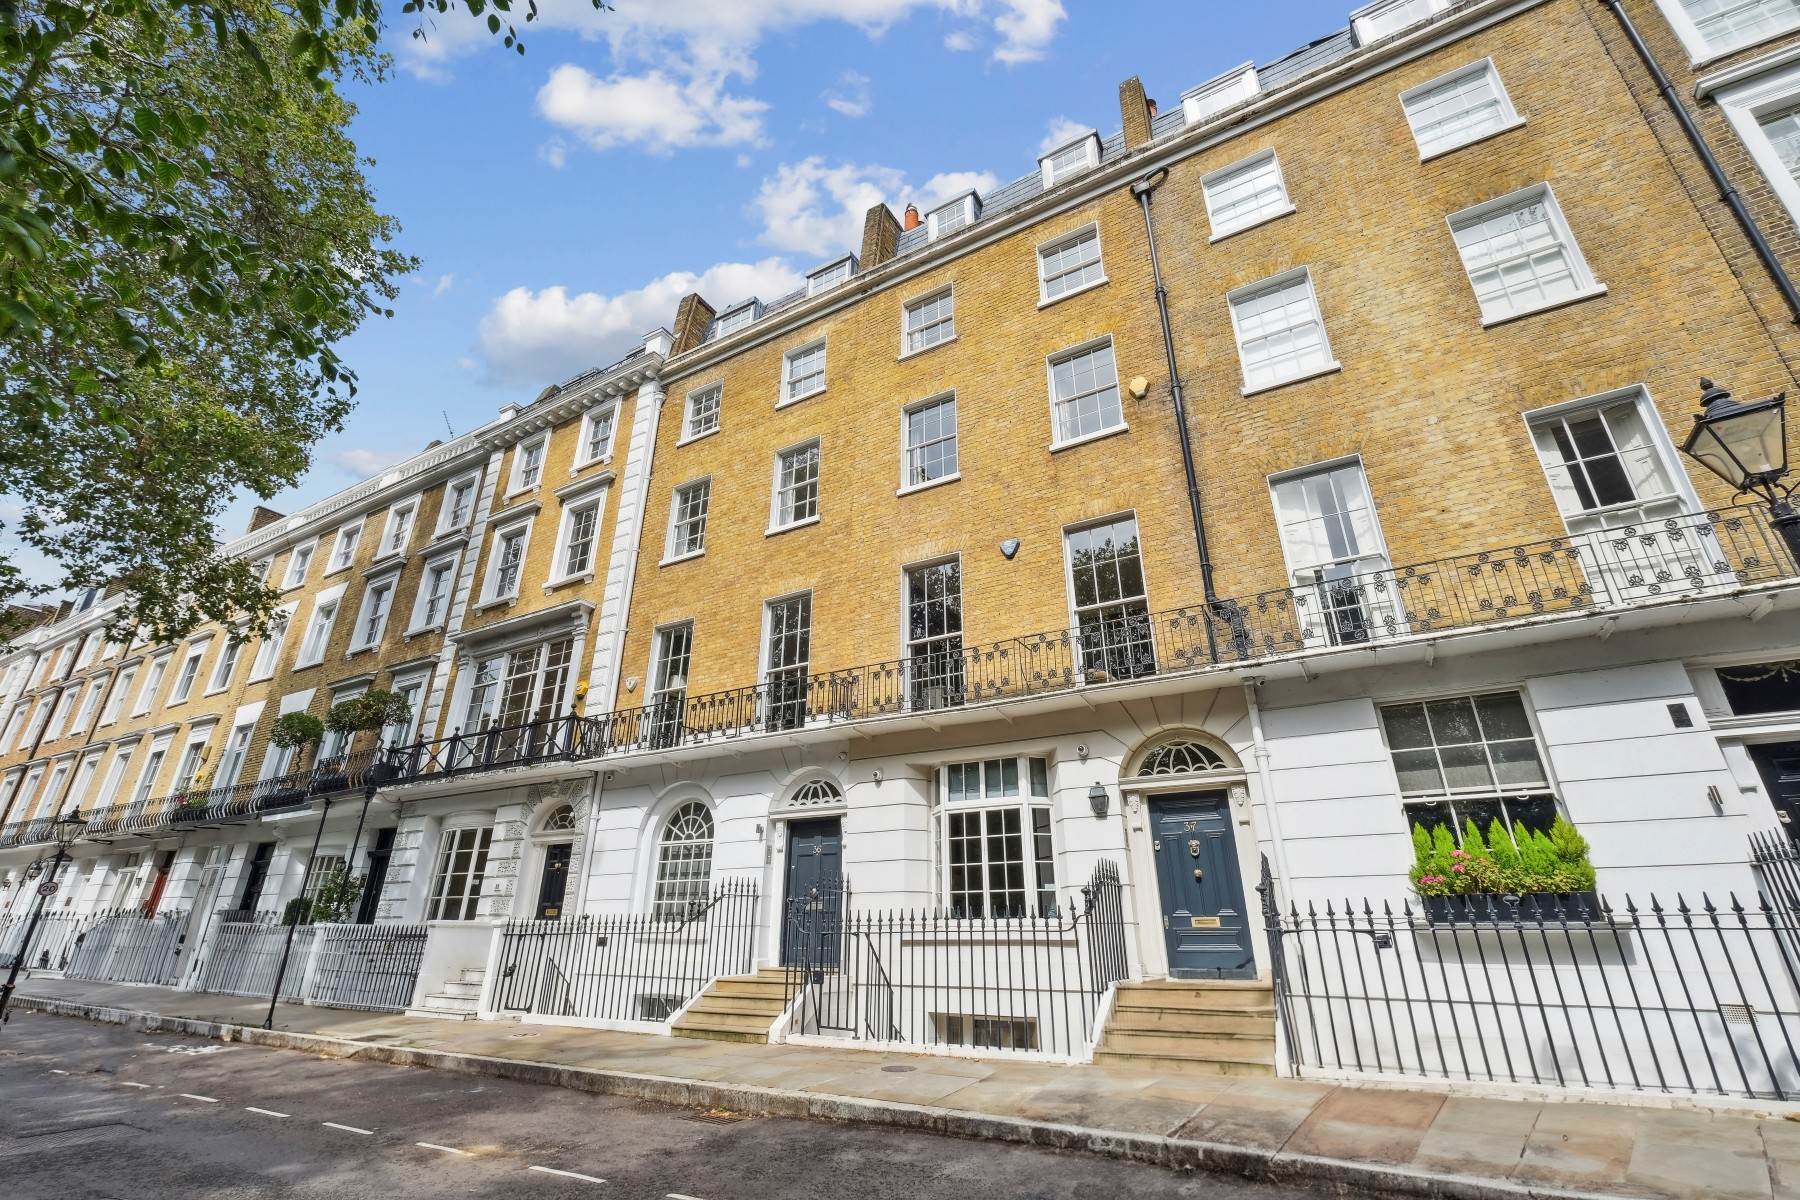 Townhouse for Sale at Montpelier Square, Knightsbridge London, England SW7 1JY United Kingdom